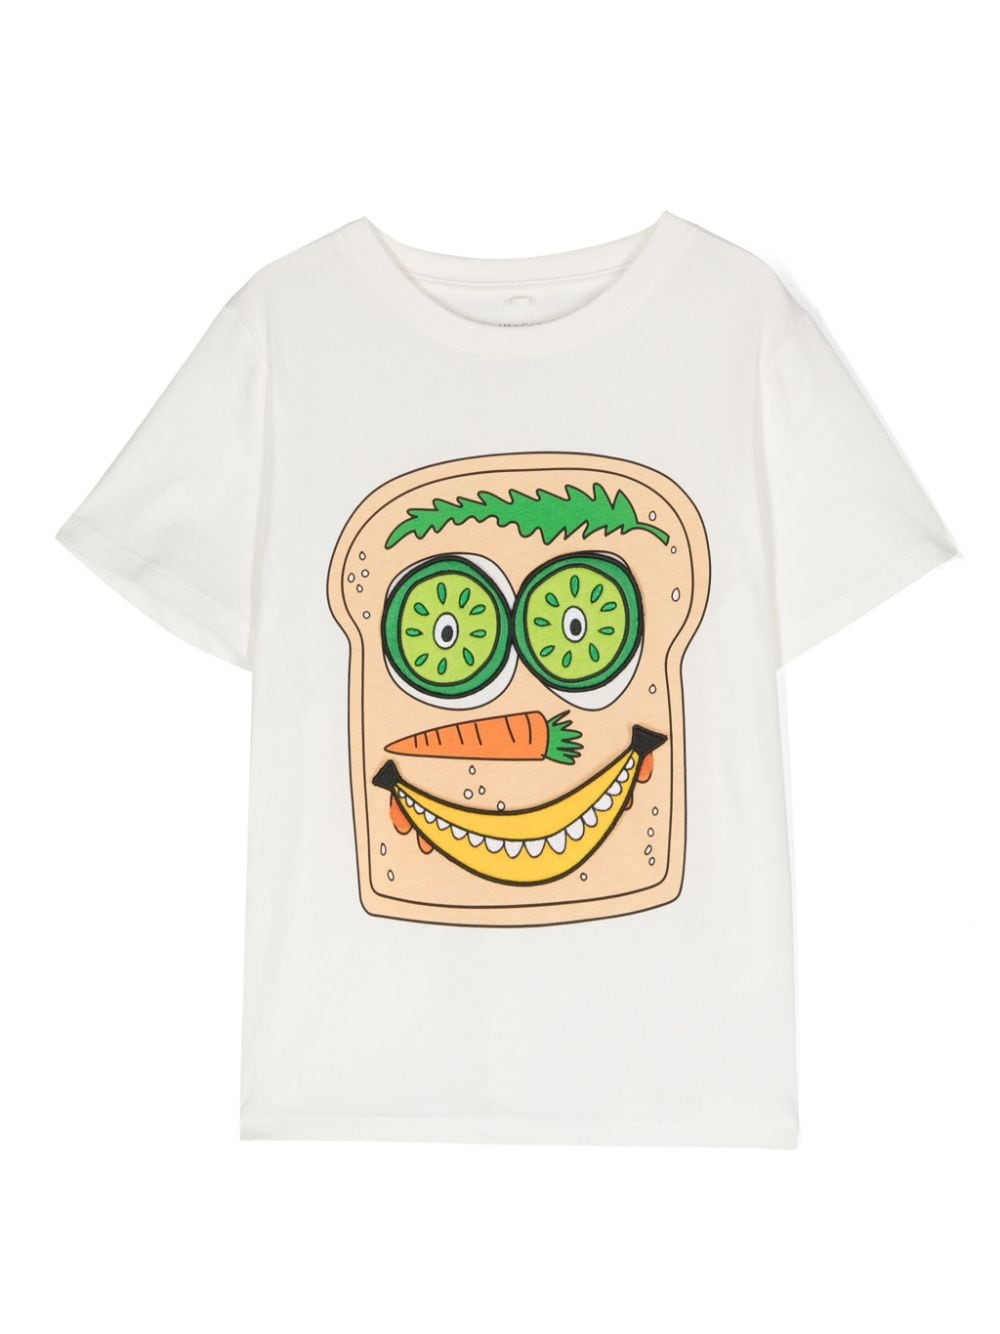 T-shirt Silly-Sandwich con stampa